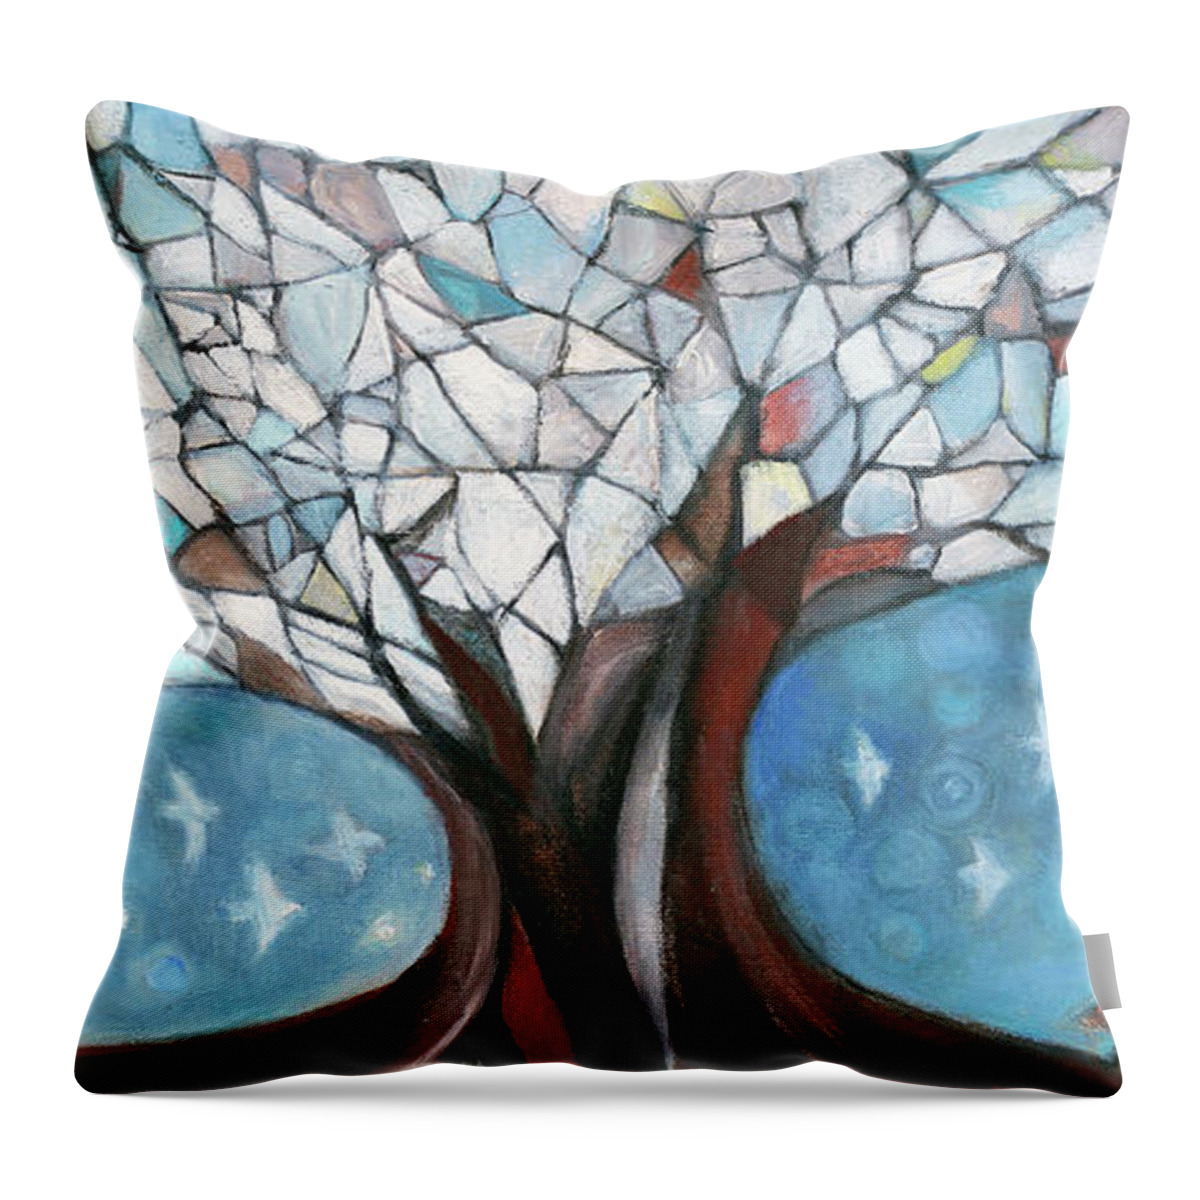 Fox Throw Pillow featuring the painting To The Wind 2 by Manami Lingerfelt